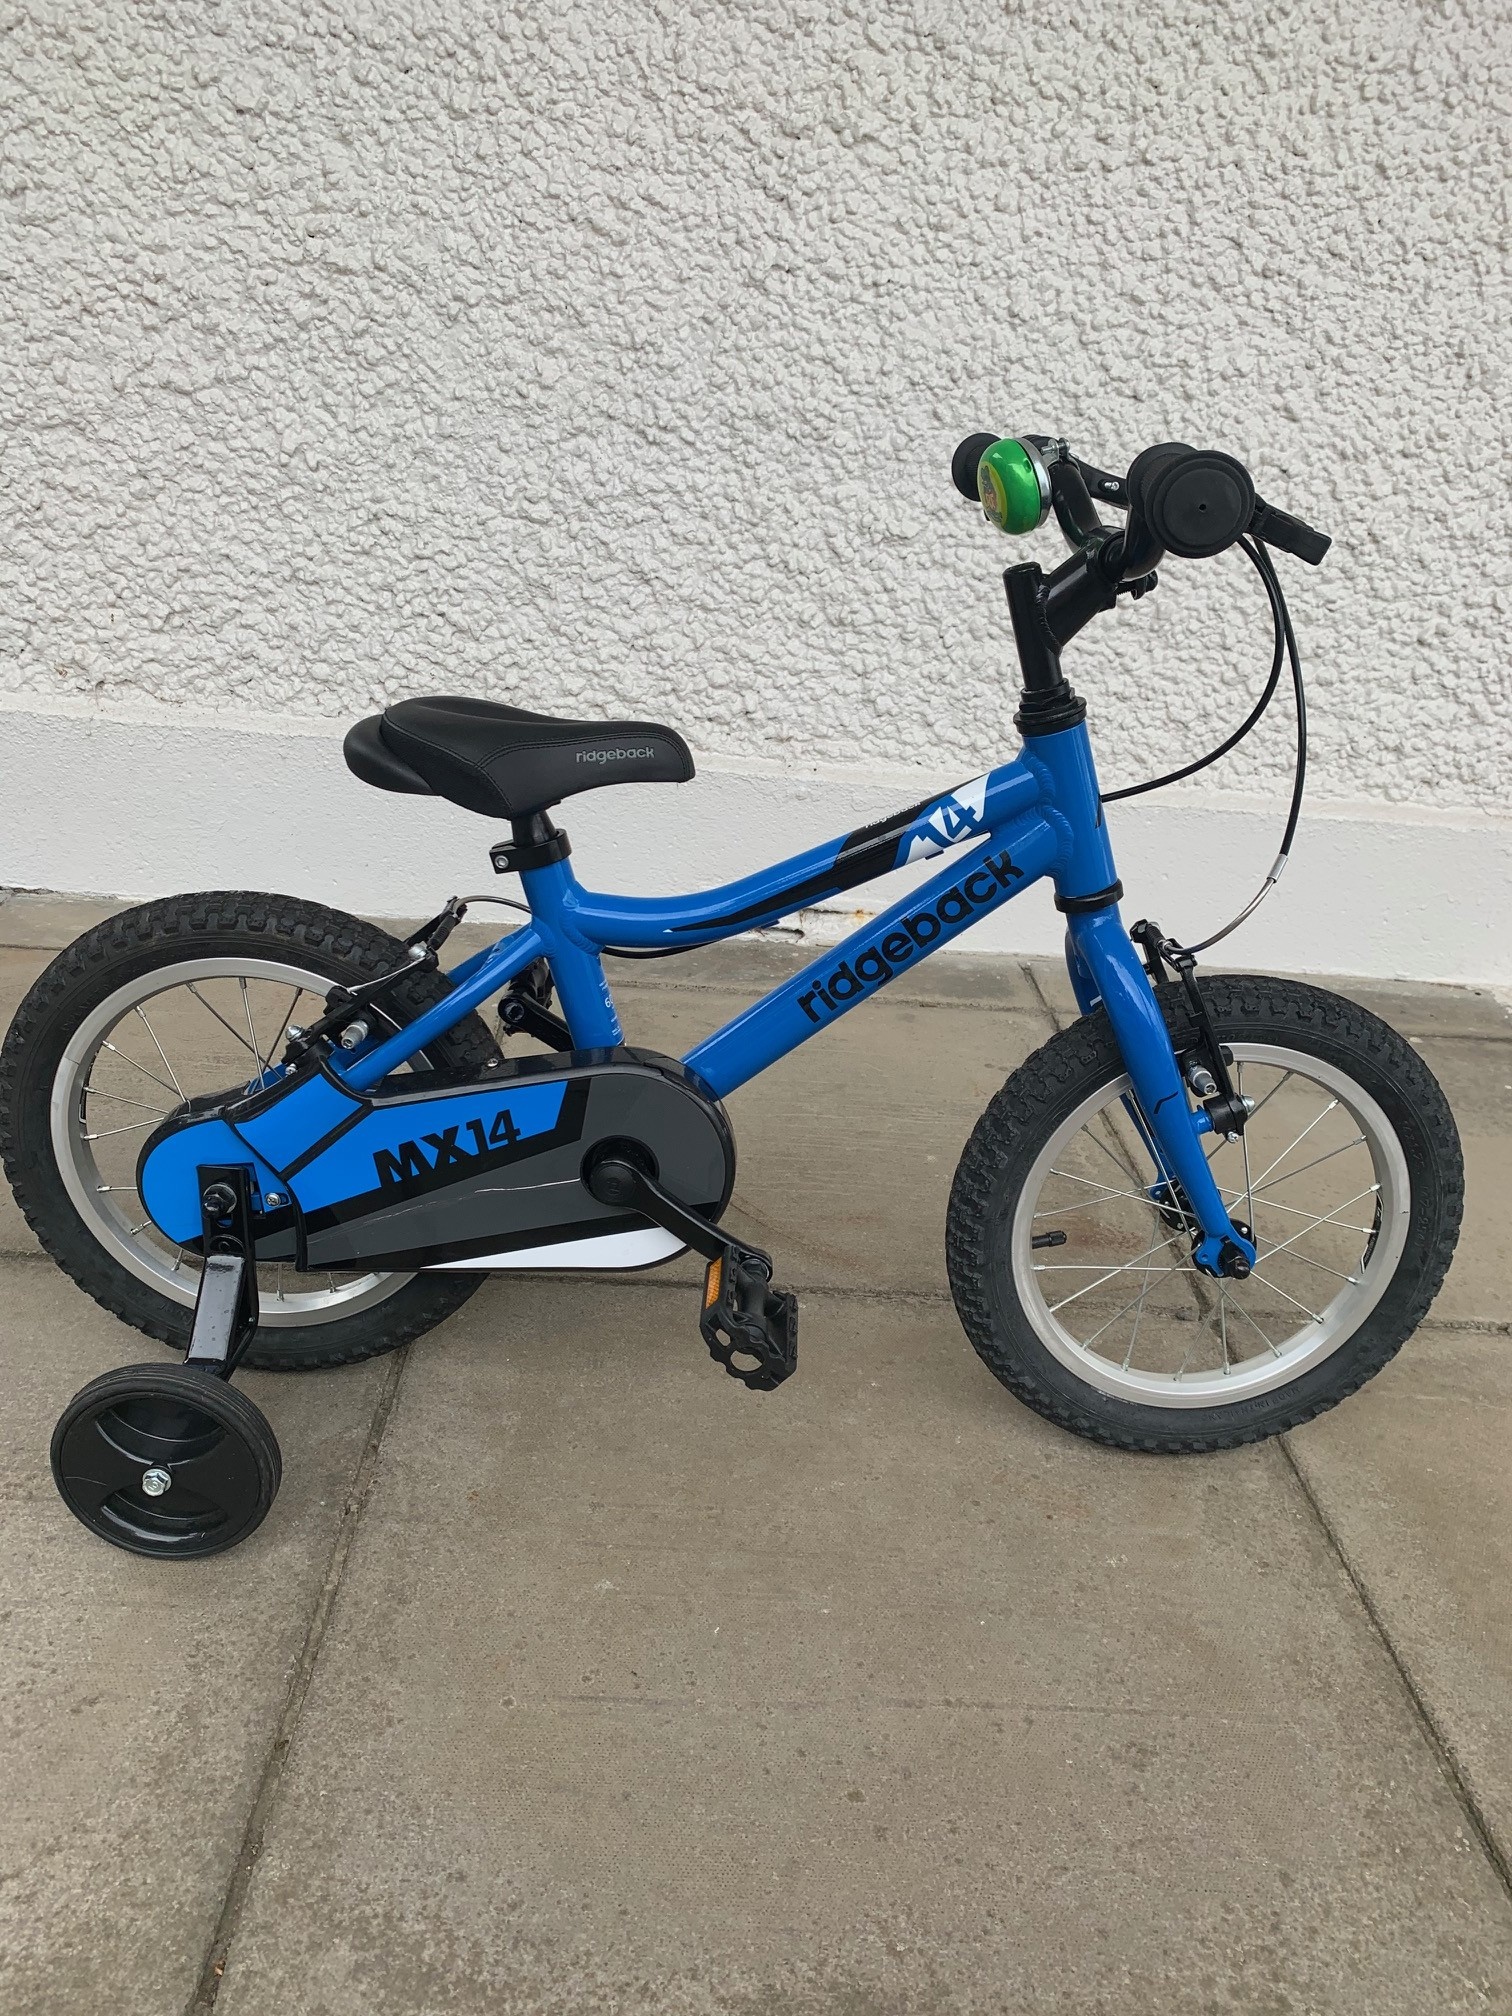 second hand cycle for kids